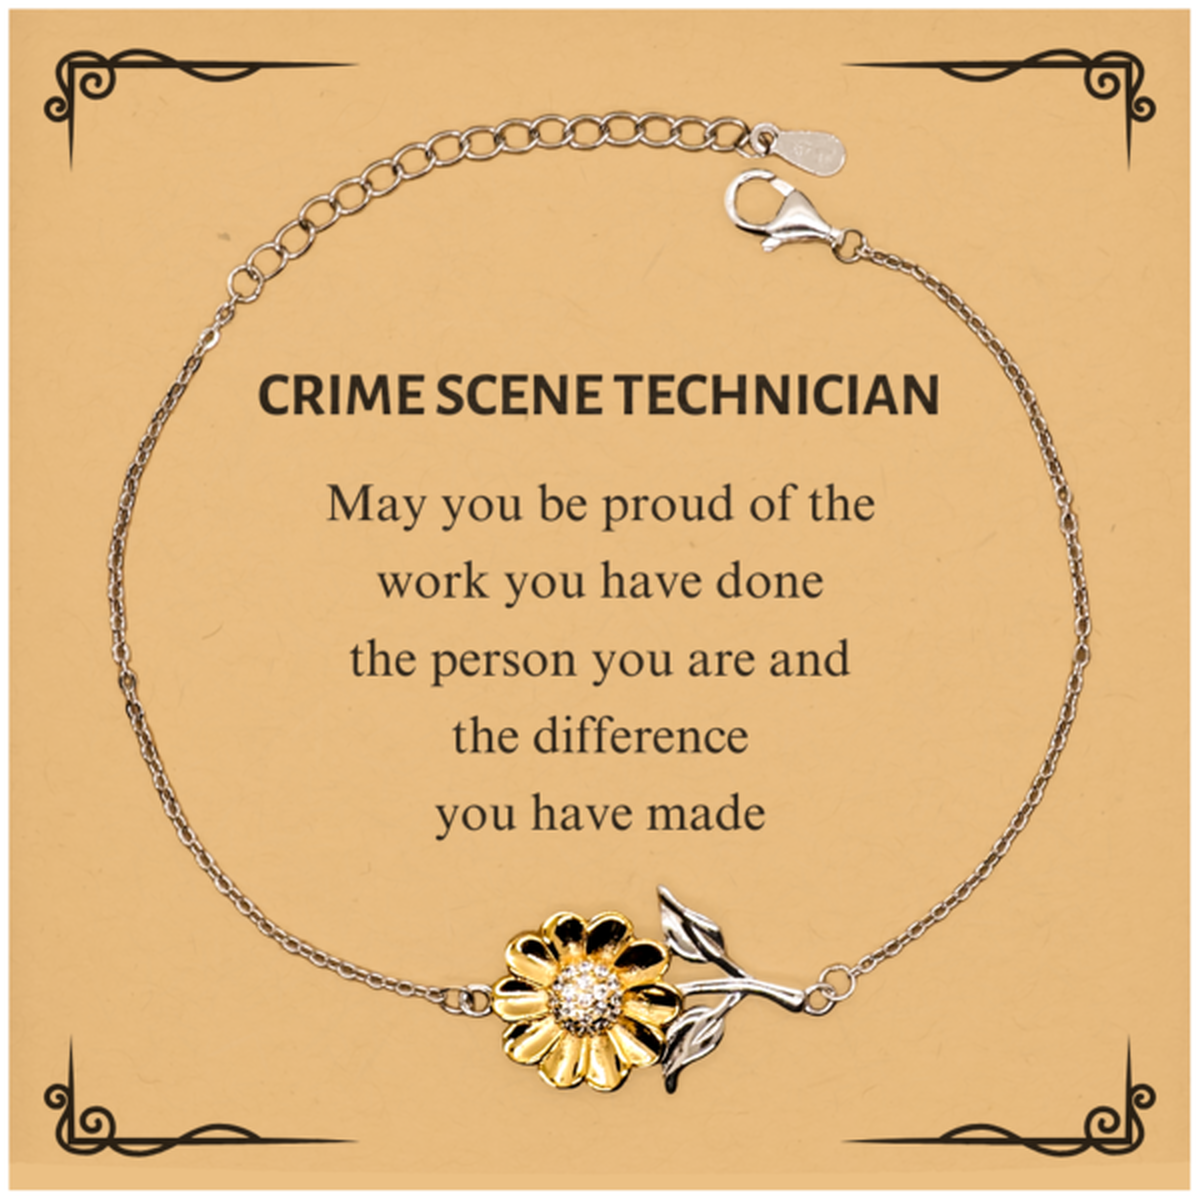 Crime Scene Technician May you be proud of the work you have done, Retirement Crime Scene Technician Sunflower Bracelet for Colleague Appreciation Gifts Amazing for Crime Scene Technician